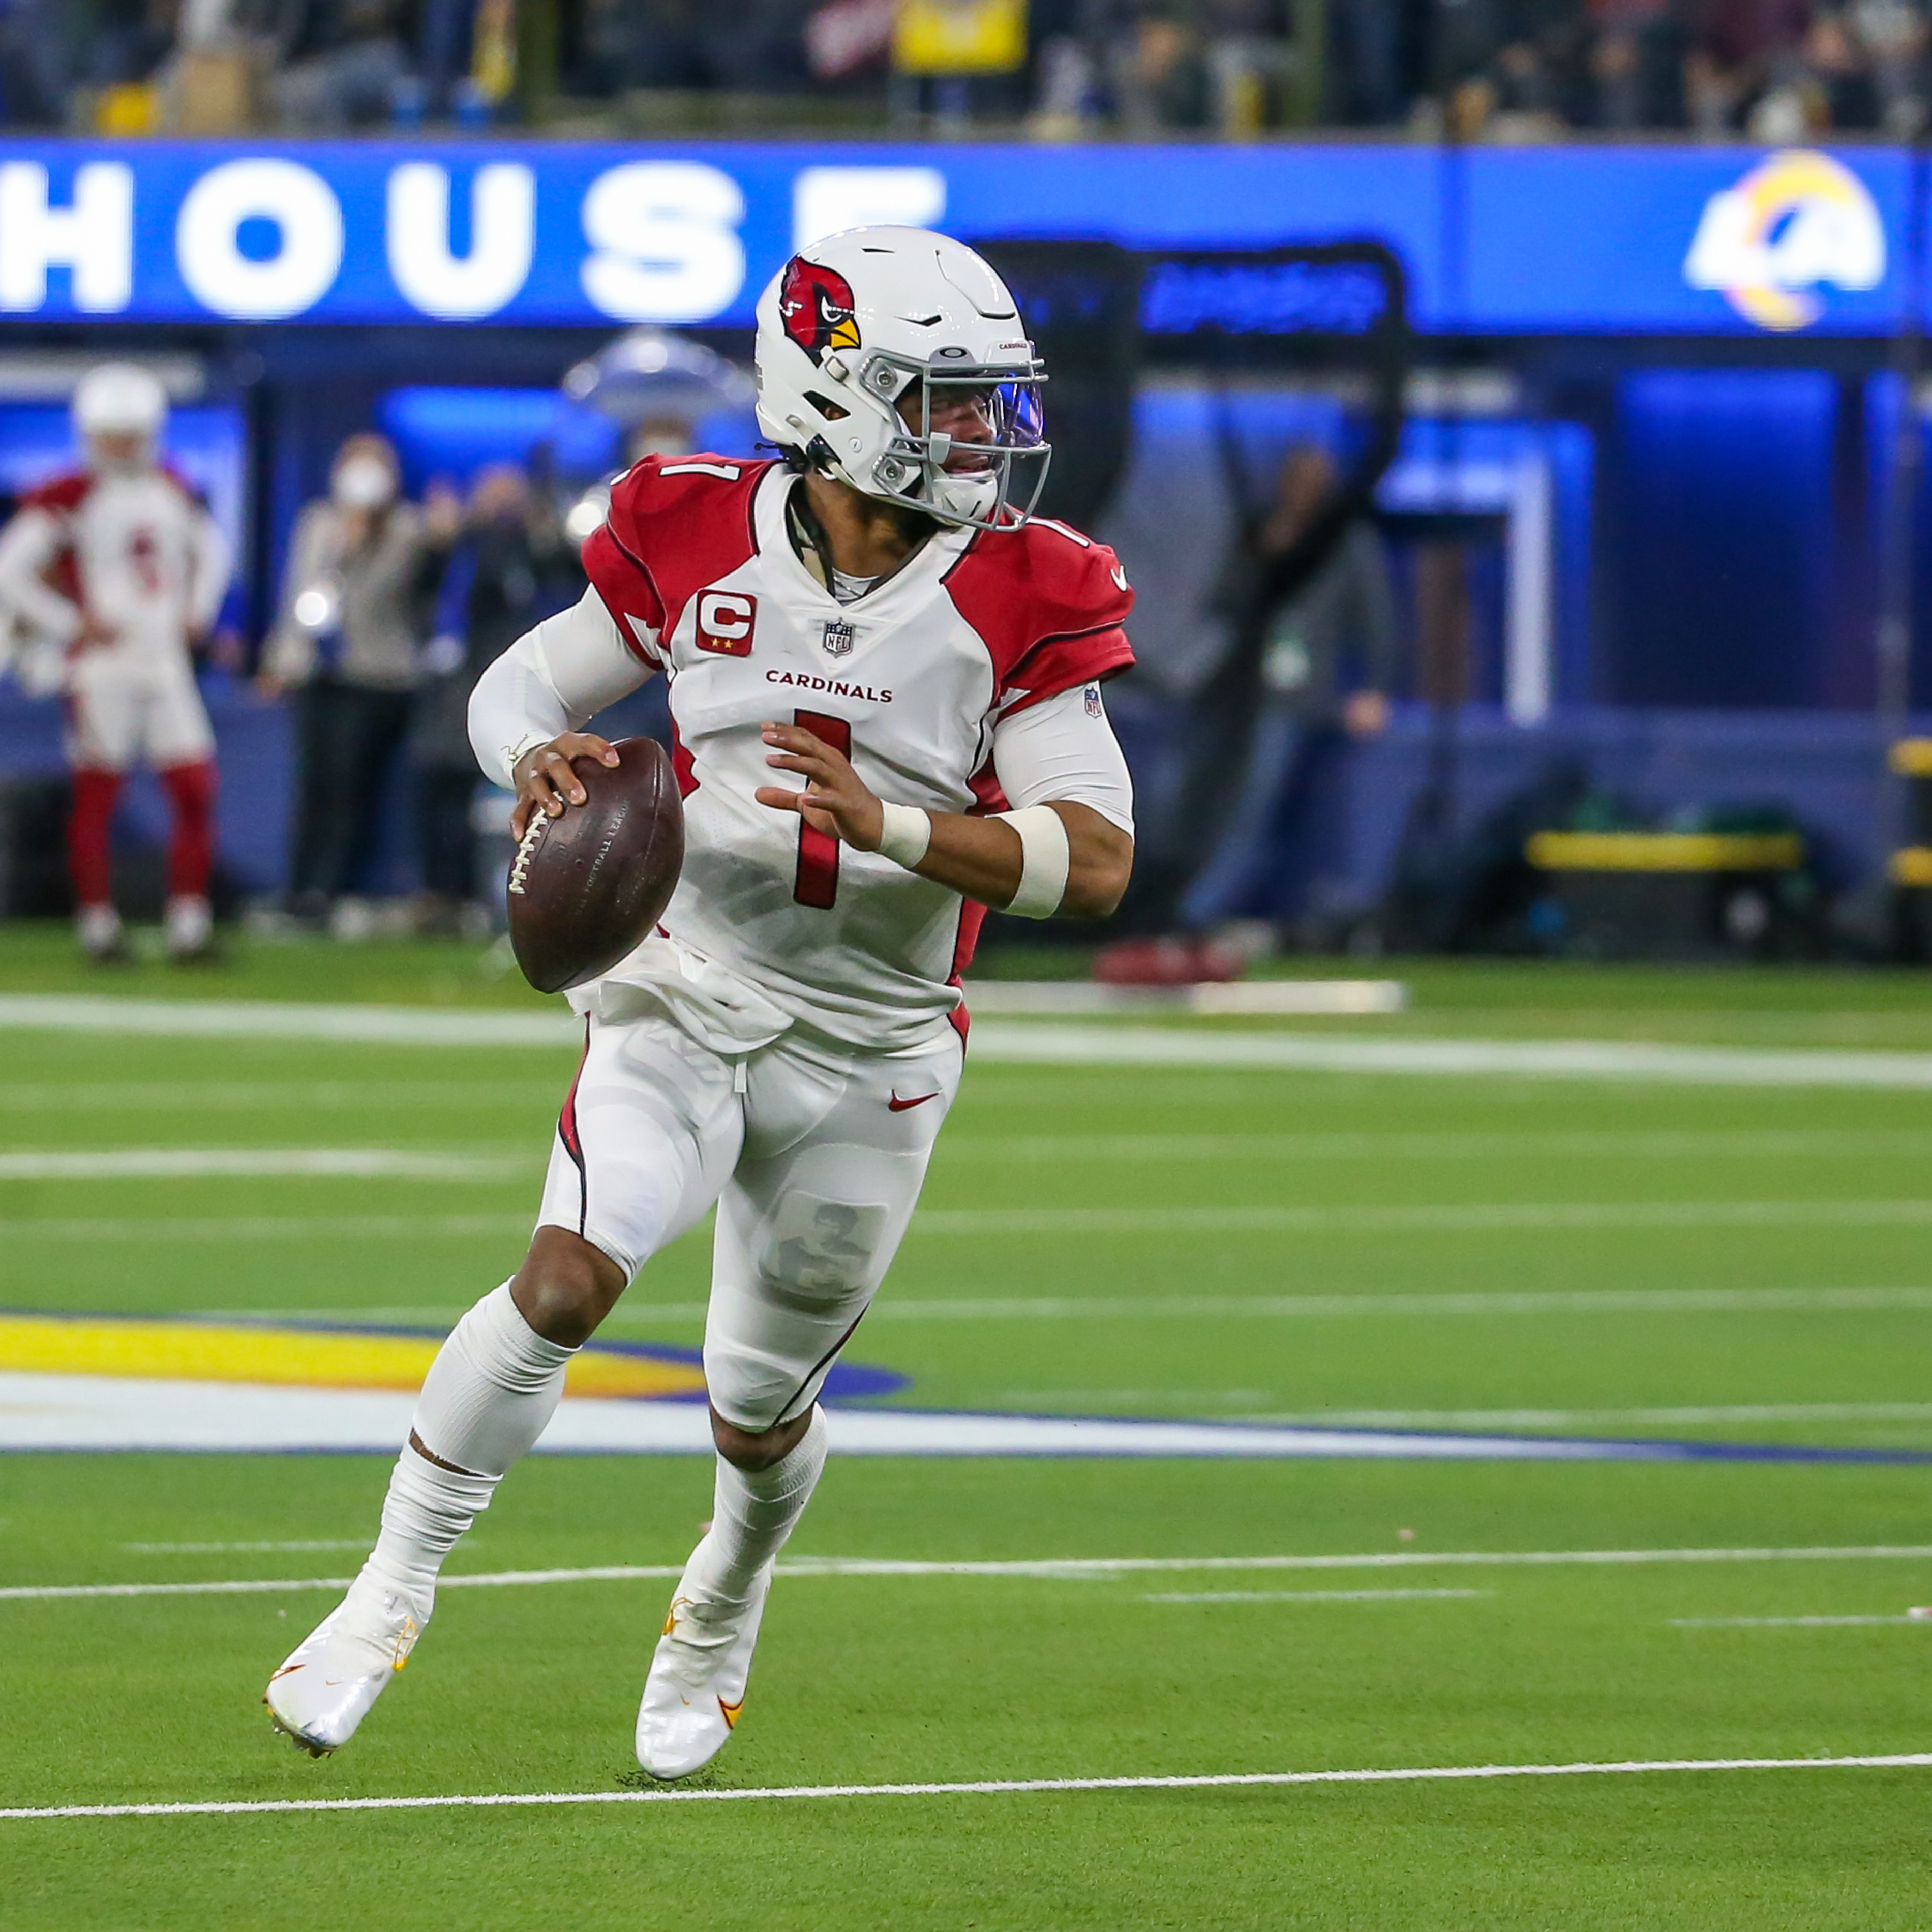 Kyler Murray Rumors: Contract Extension Likely Won’t Happen Until Late June or July